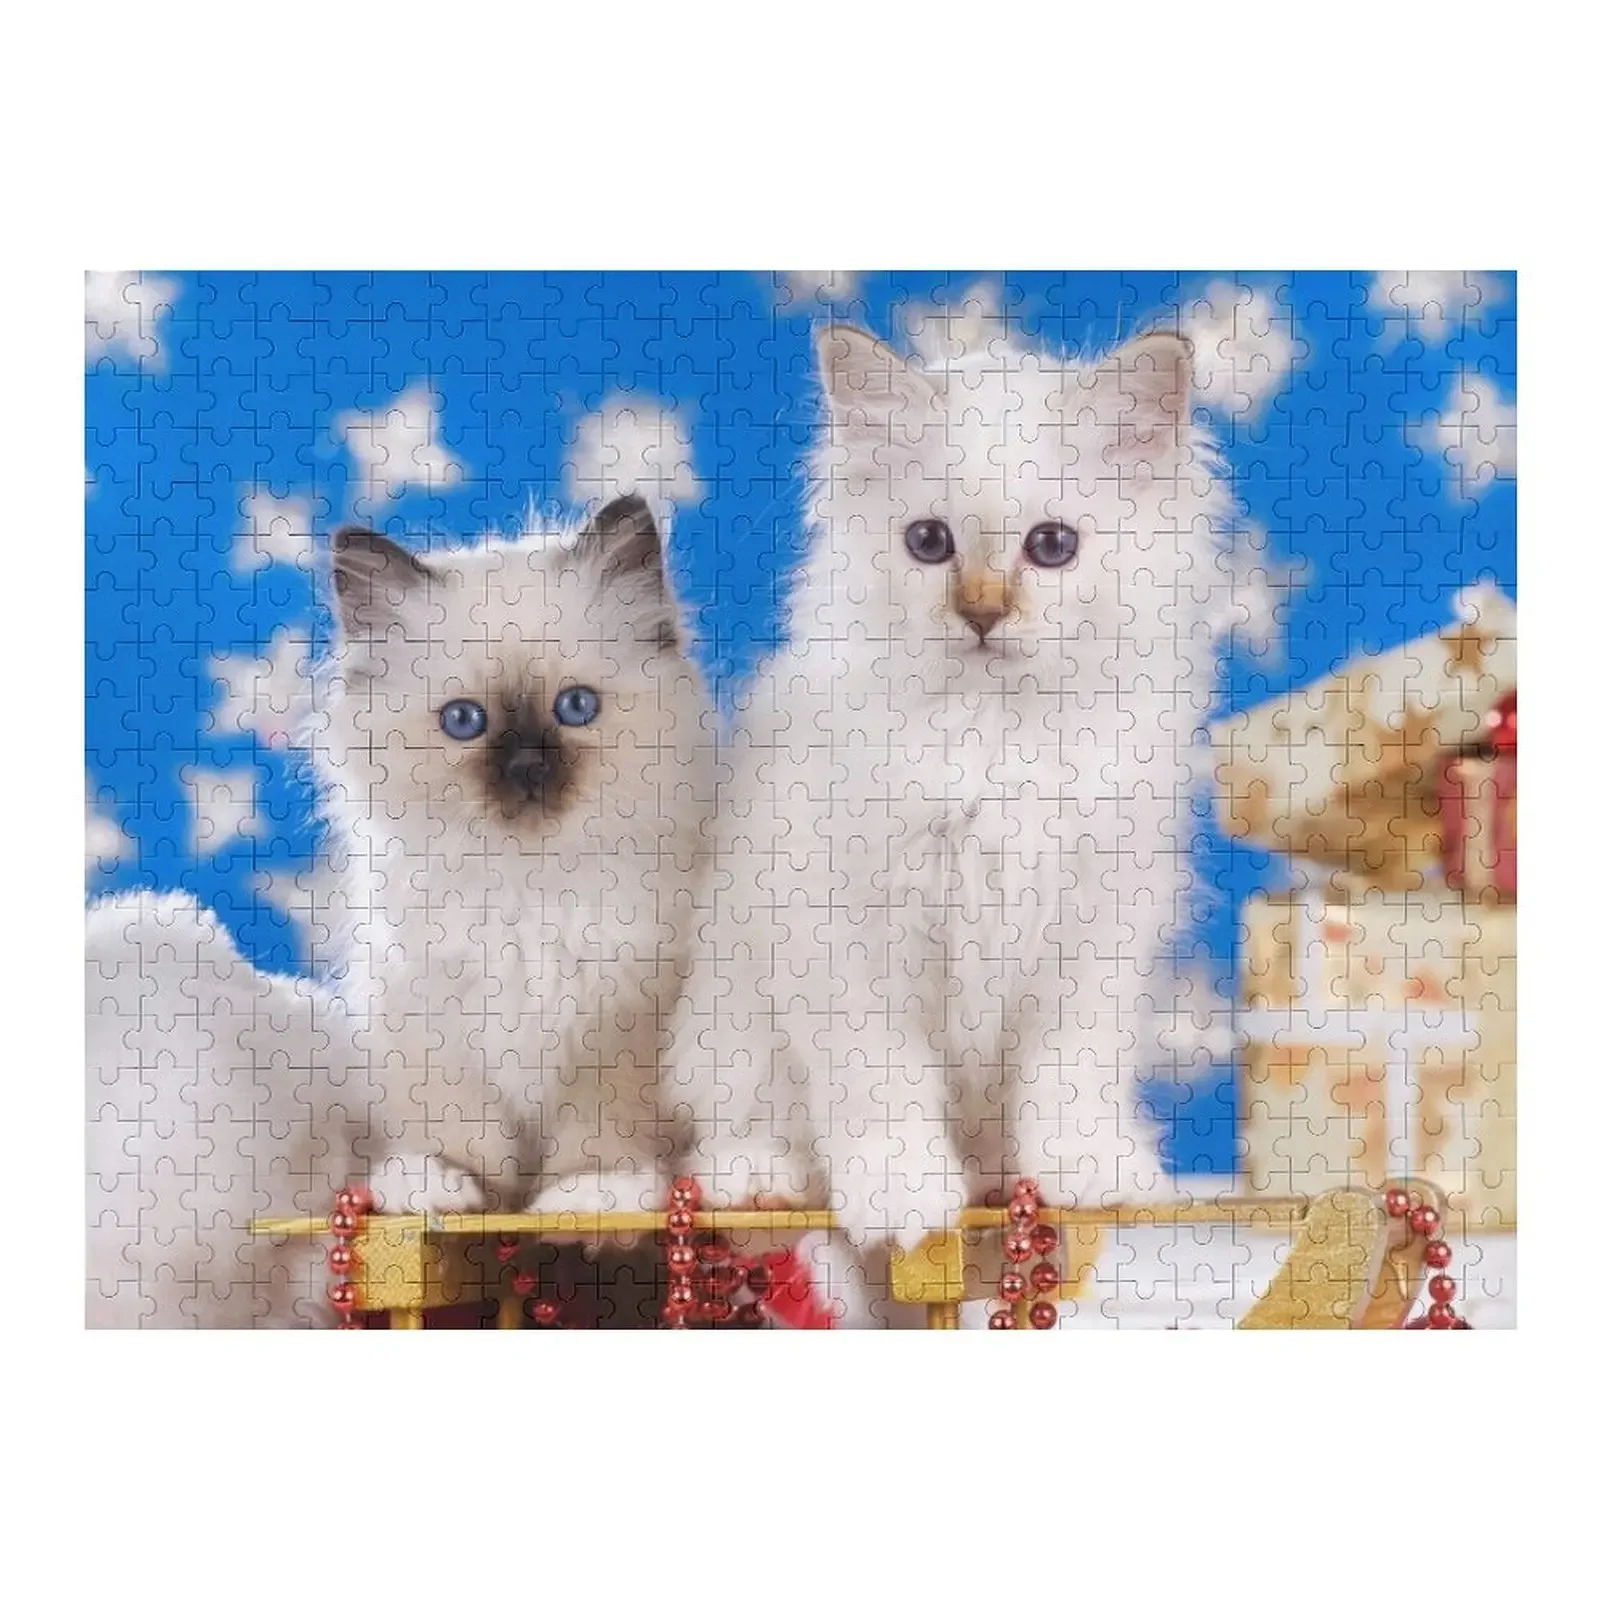 Cute holy Burma kitten wish Merry Christmas animal cats puzzle Jigsaw Puzzle Custom Child Gift Customs With Photo Puzzle solar ultrasonic repeller waterproof outdoor pest animal expeller with motion sensor and flashing light repeller for cats dogs repel pesticides